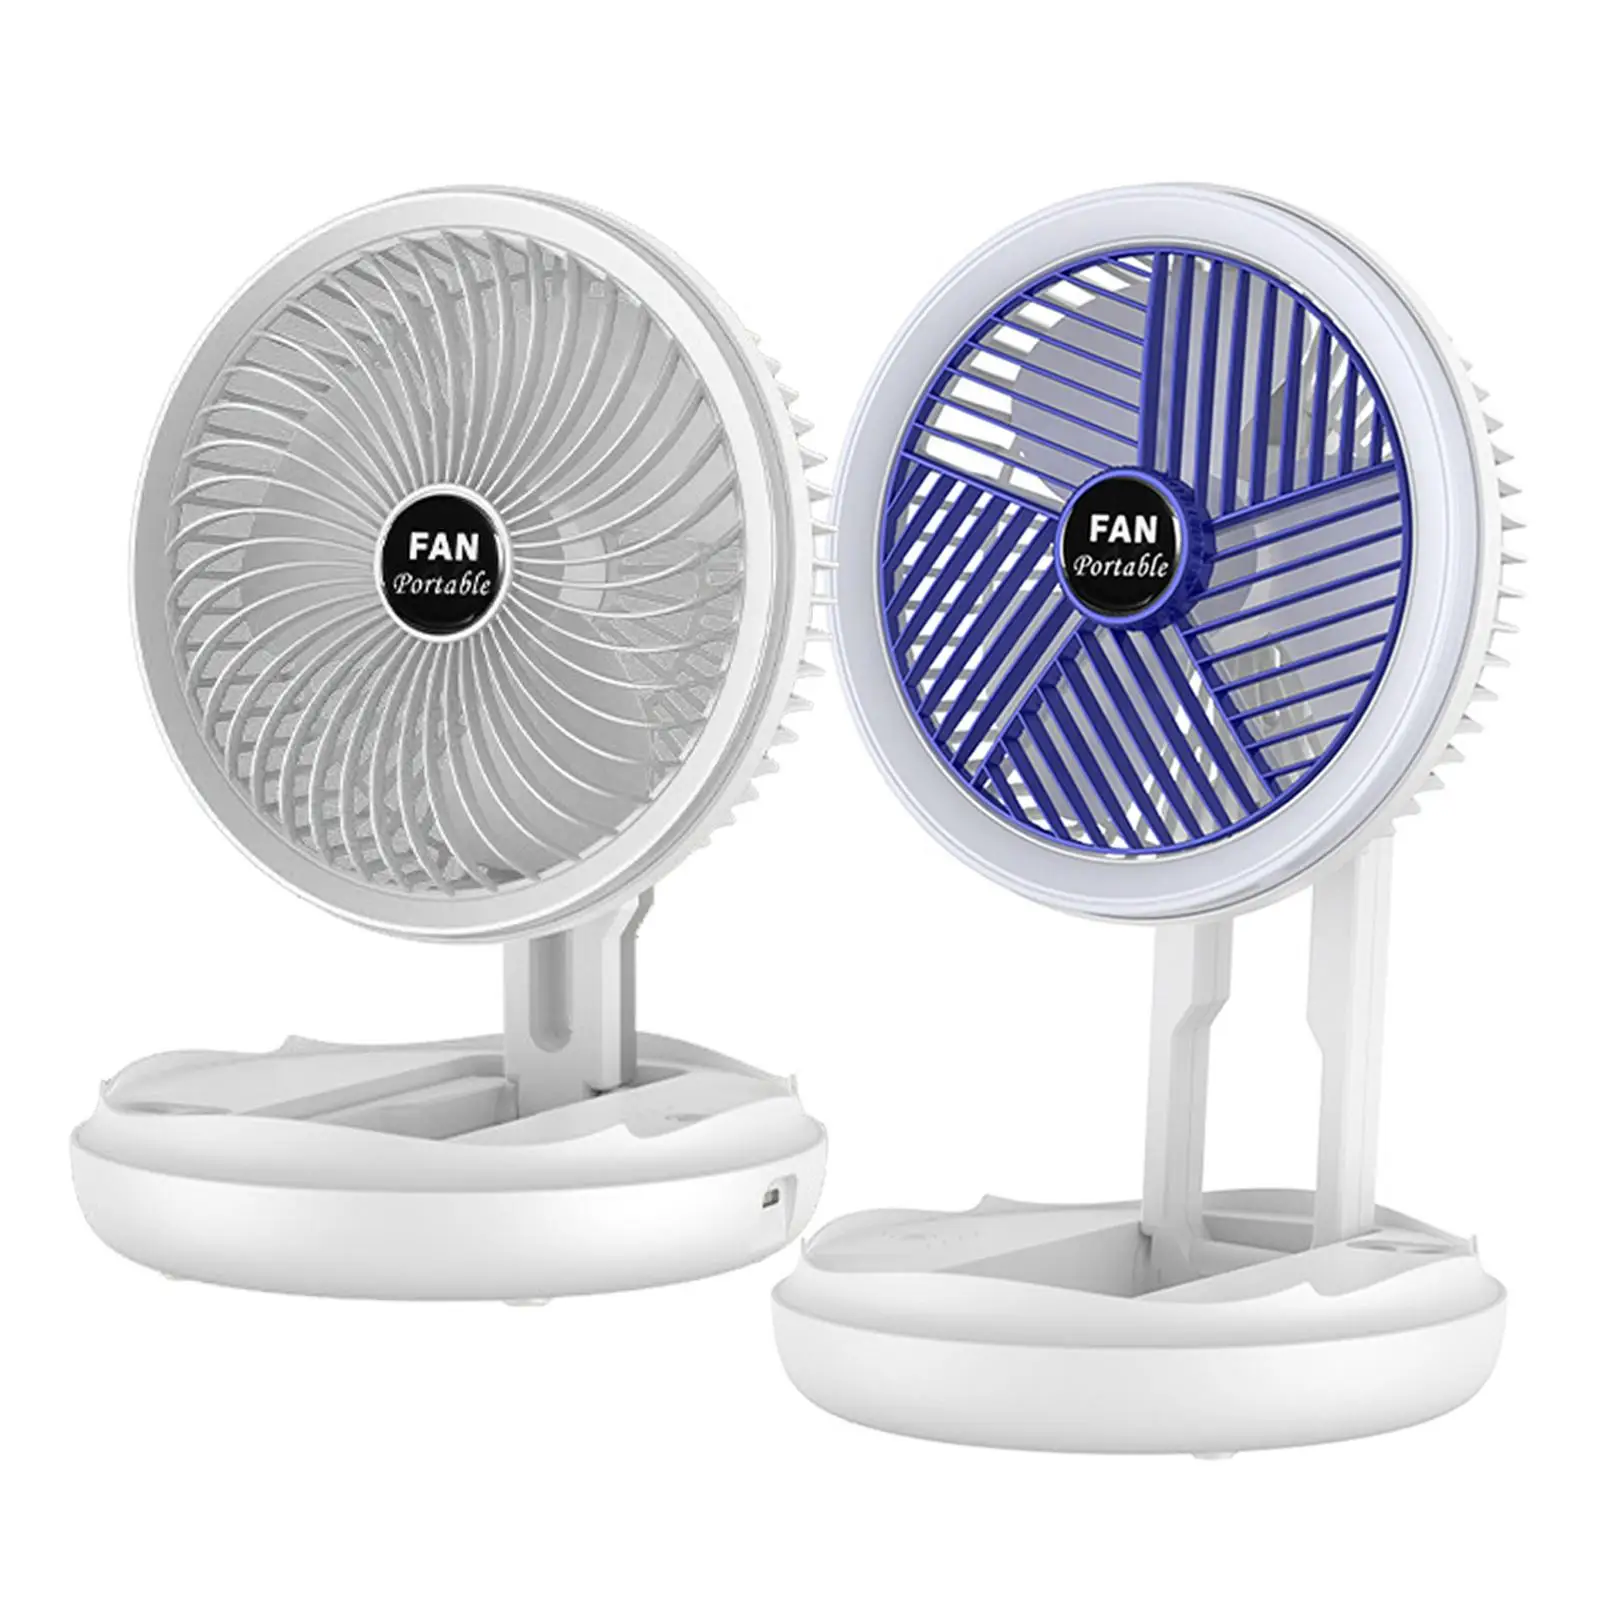 2 in 1 USB Desk Fan with Light Quiet Operation Adjustable Hurricane Car RV Rotatable Portable Mini Personal Table Cooling Fan